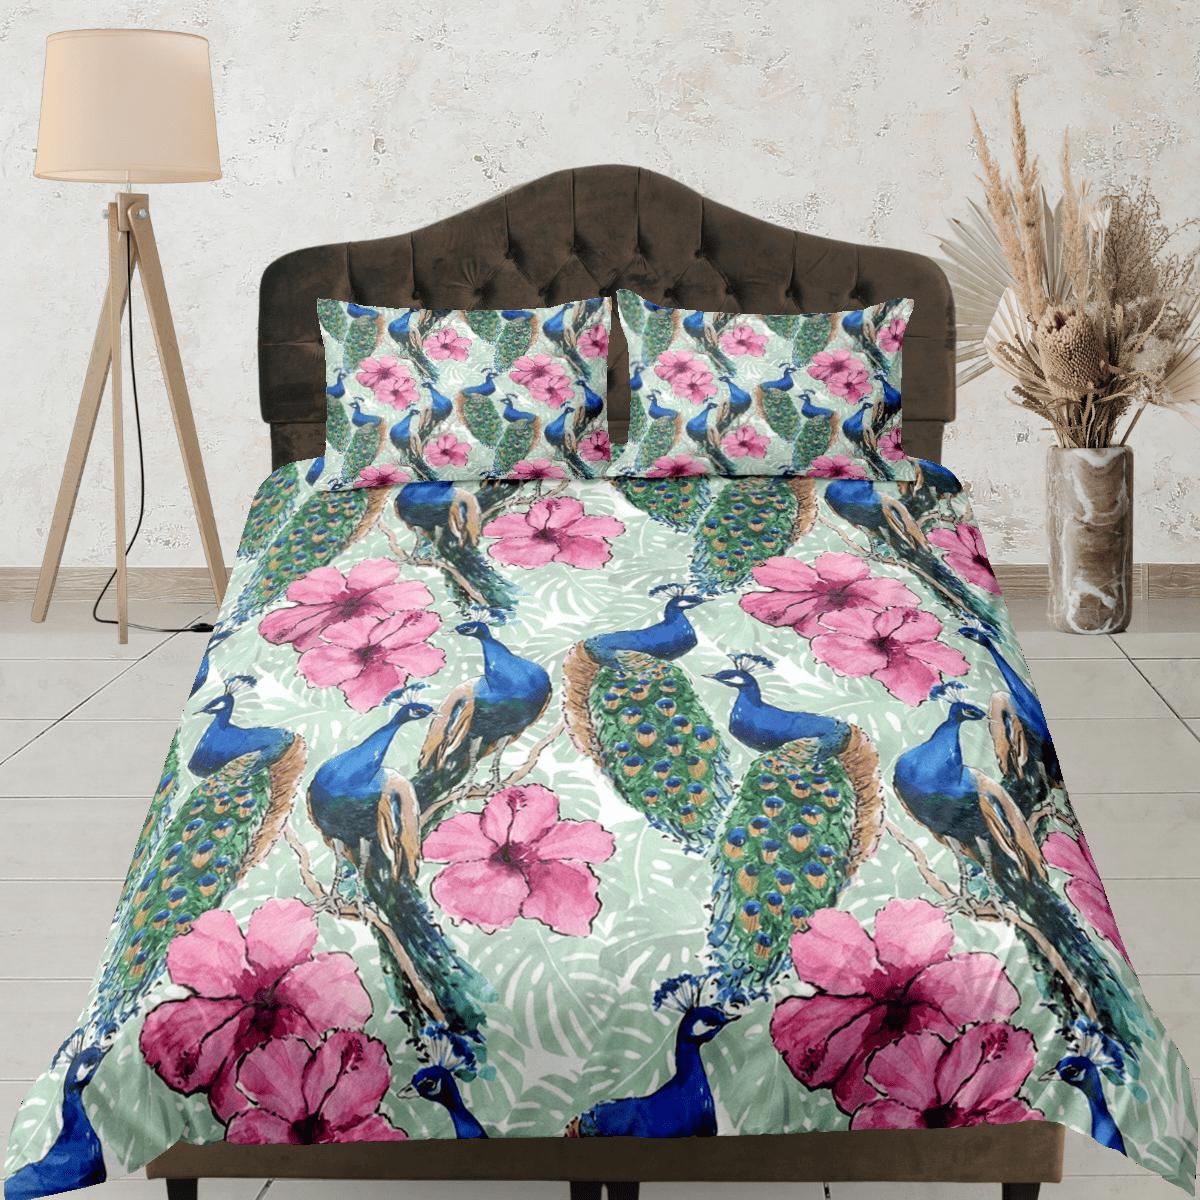 daintyduvet Peacock and pink hibiscus duvet cover colorful bedding, teen girl bedroom, baby girl crib bedding boho maximalist aesthetic bedding